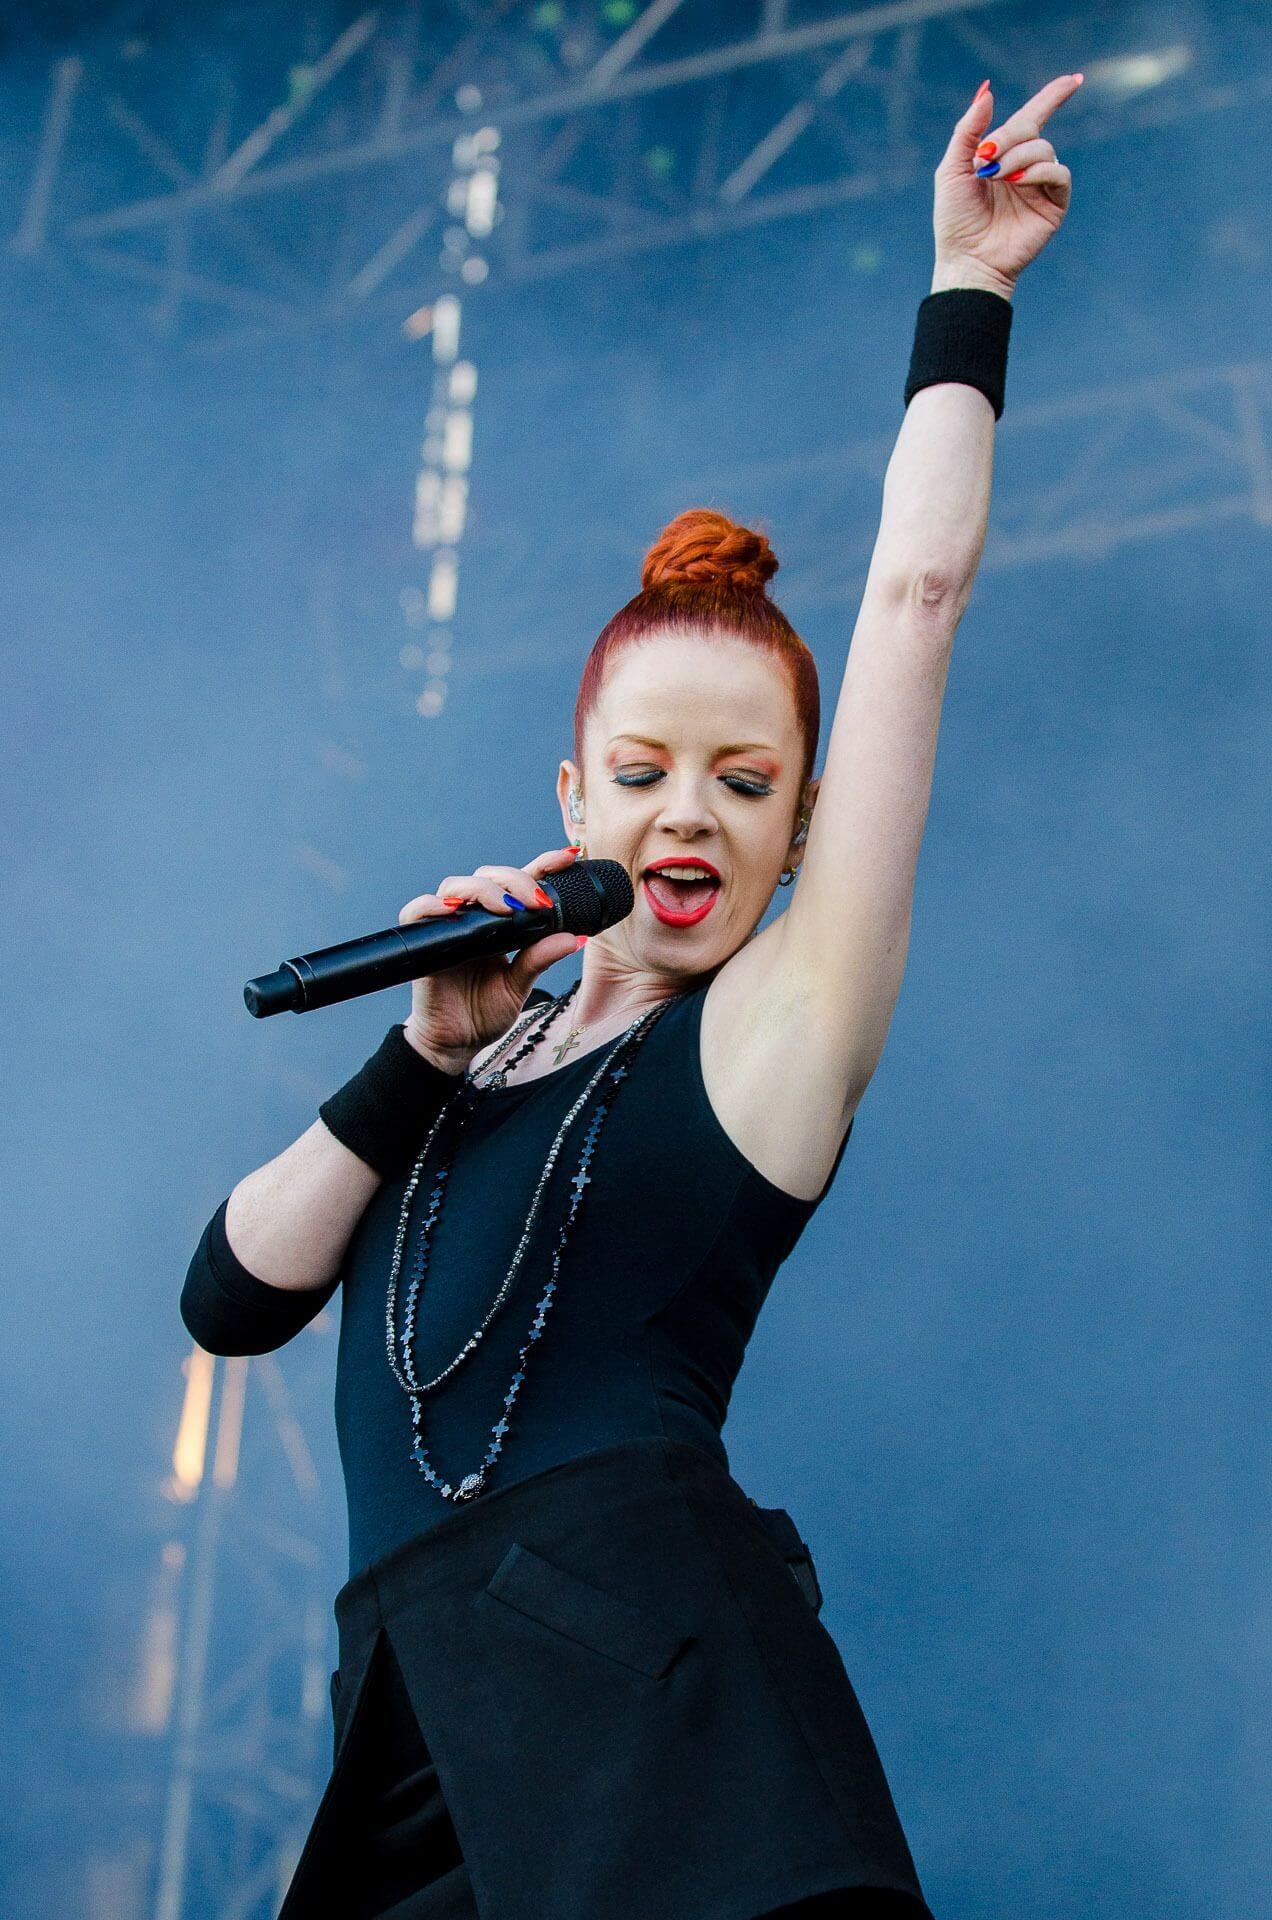 Garbage band, Shirley Manson, Hot pictures, Viraler, 1280x1920 HD Phone